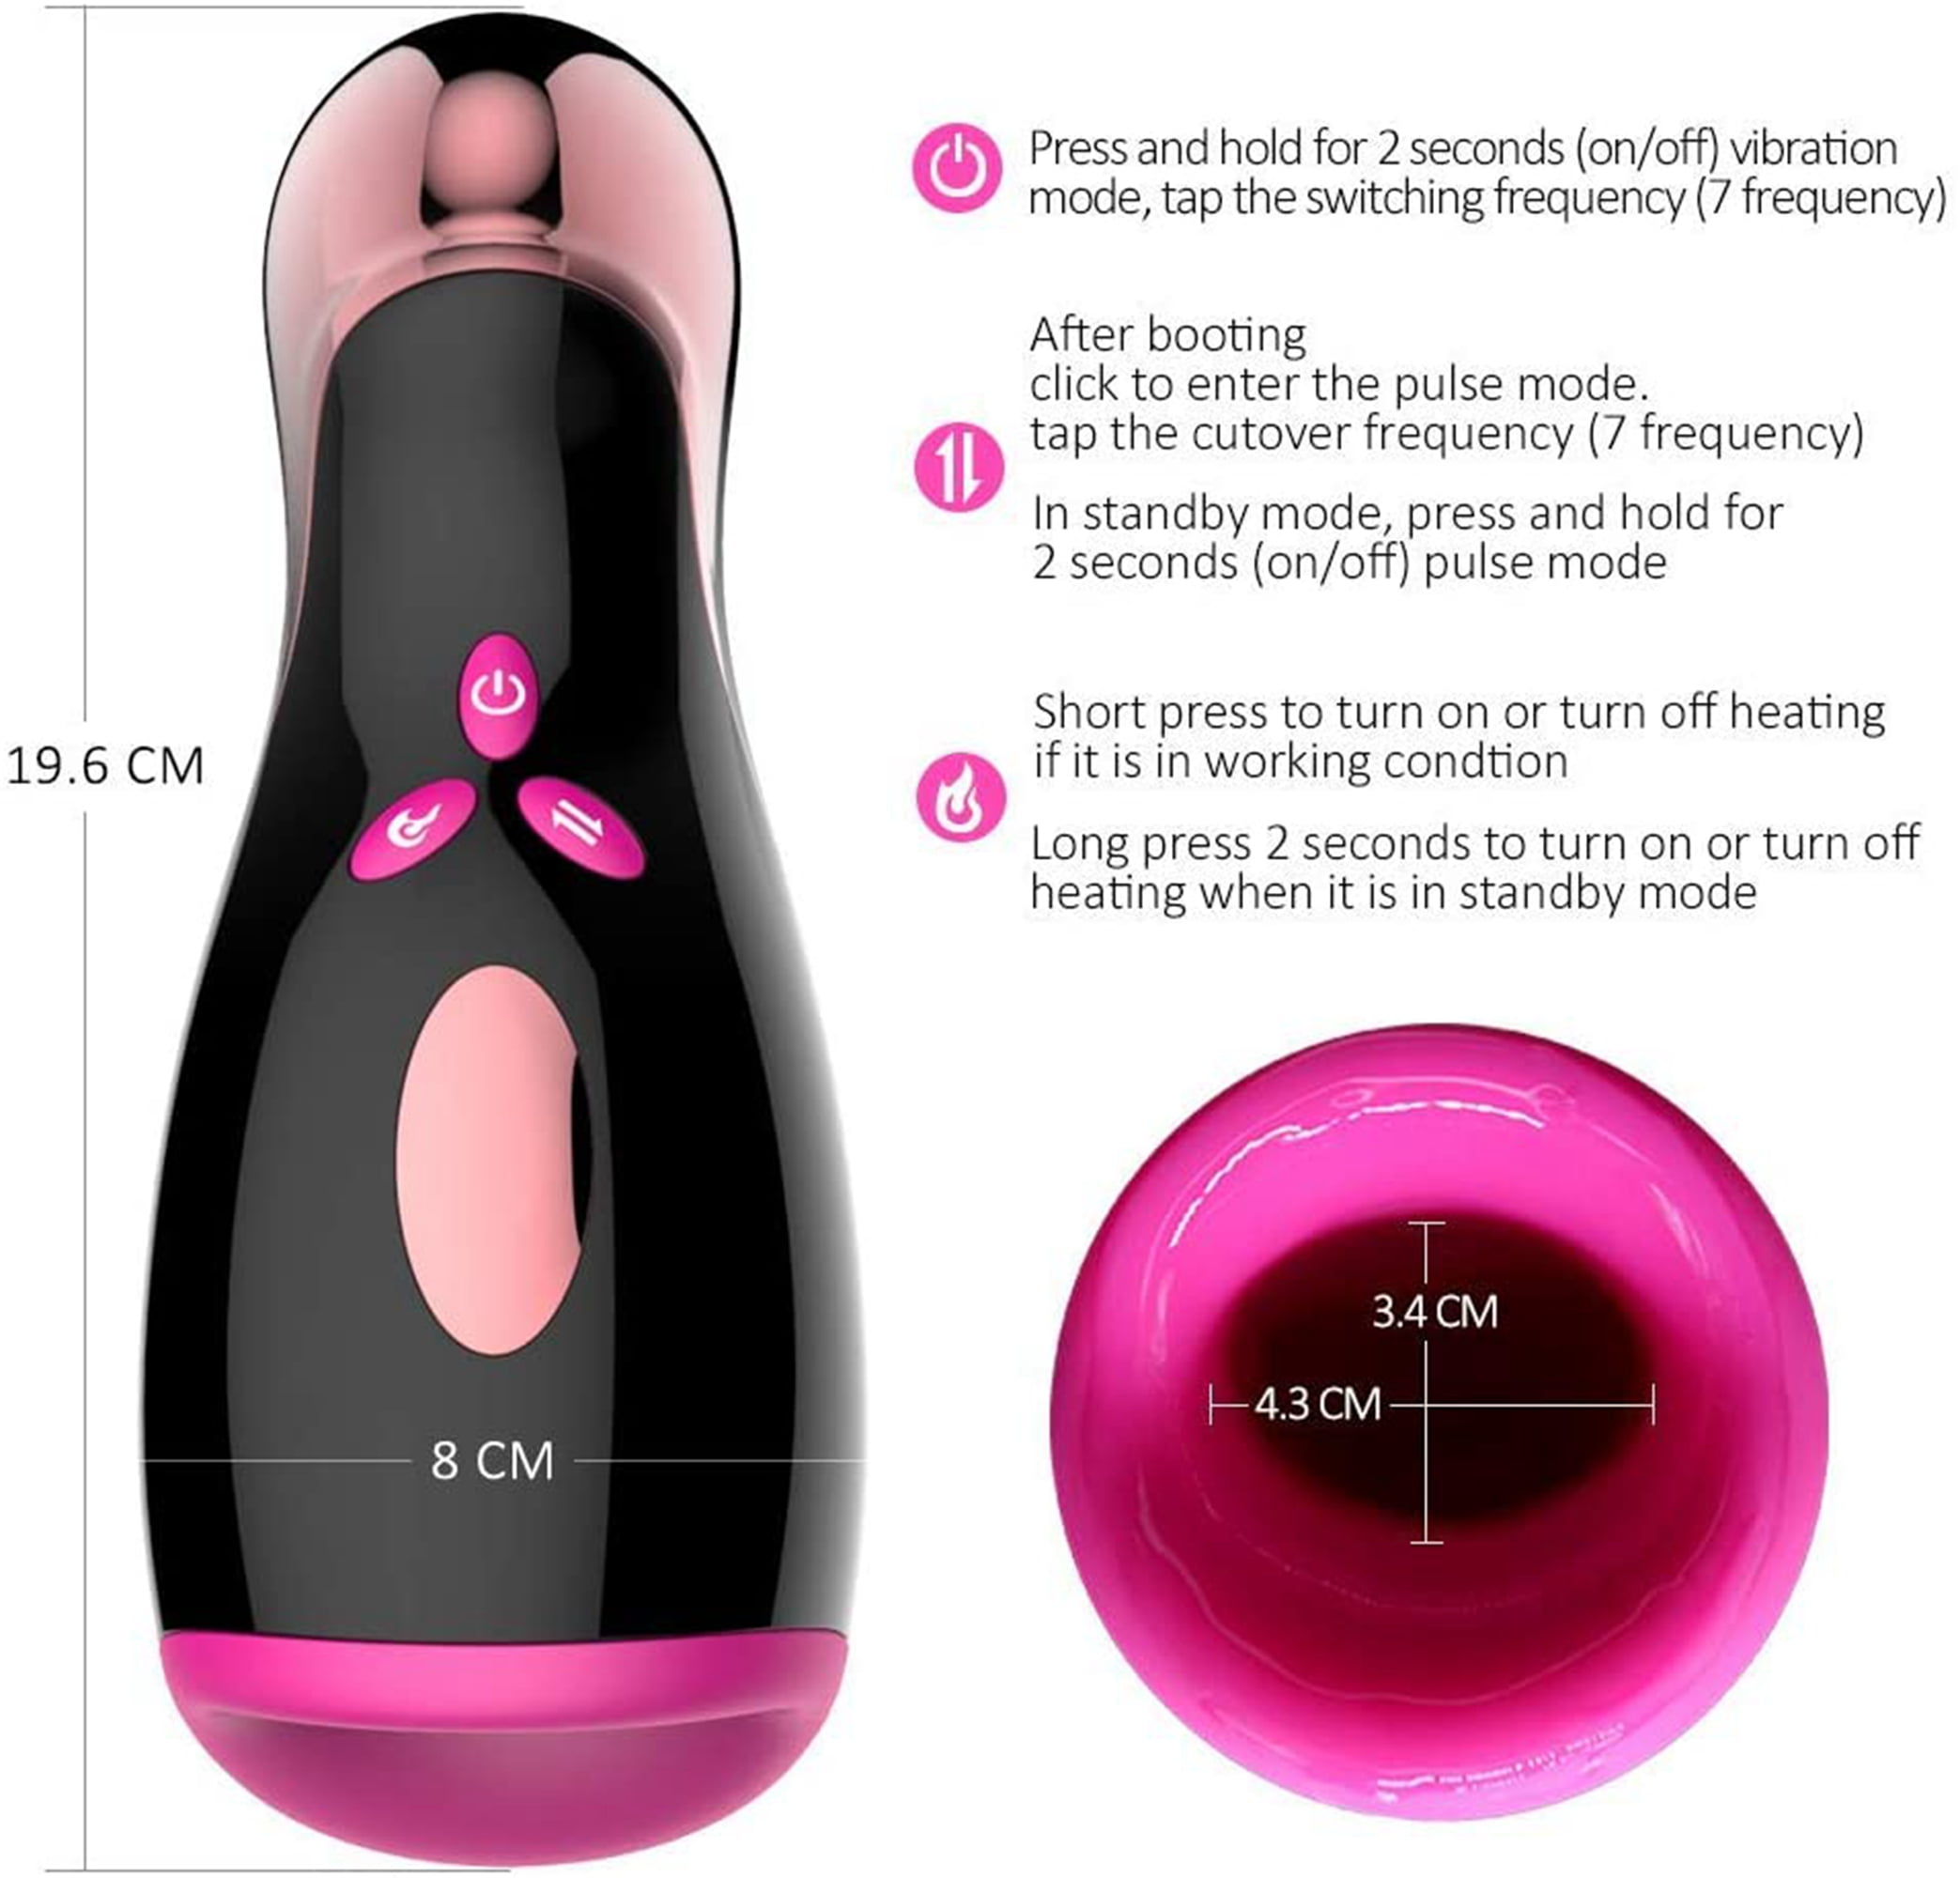 FESXTY Automatic Male Masturbator Cup with 7 Thrusting Vibration Stimulation, Electric Sex Toy, Adult Sex Toys for image